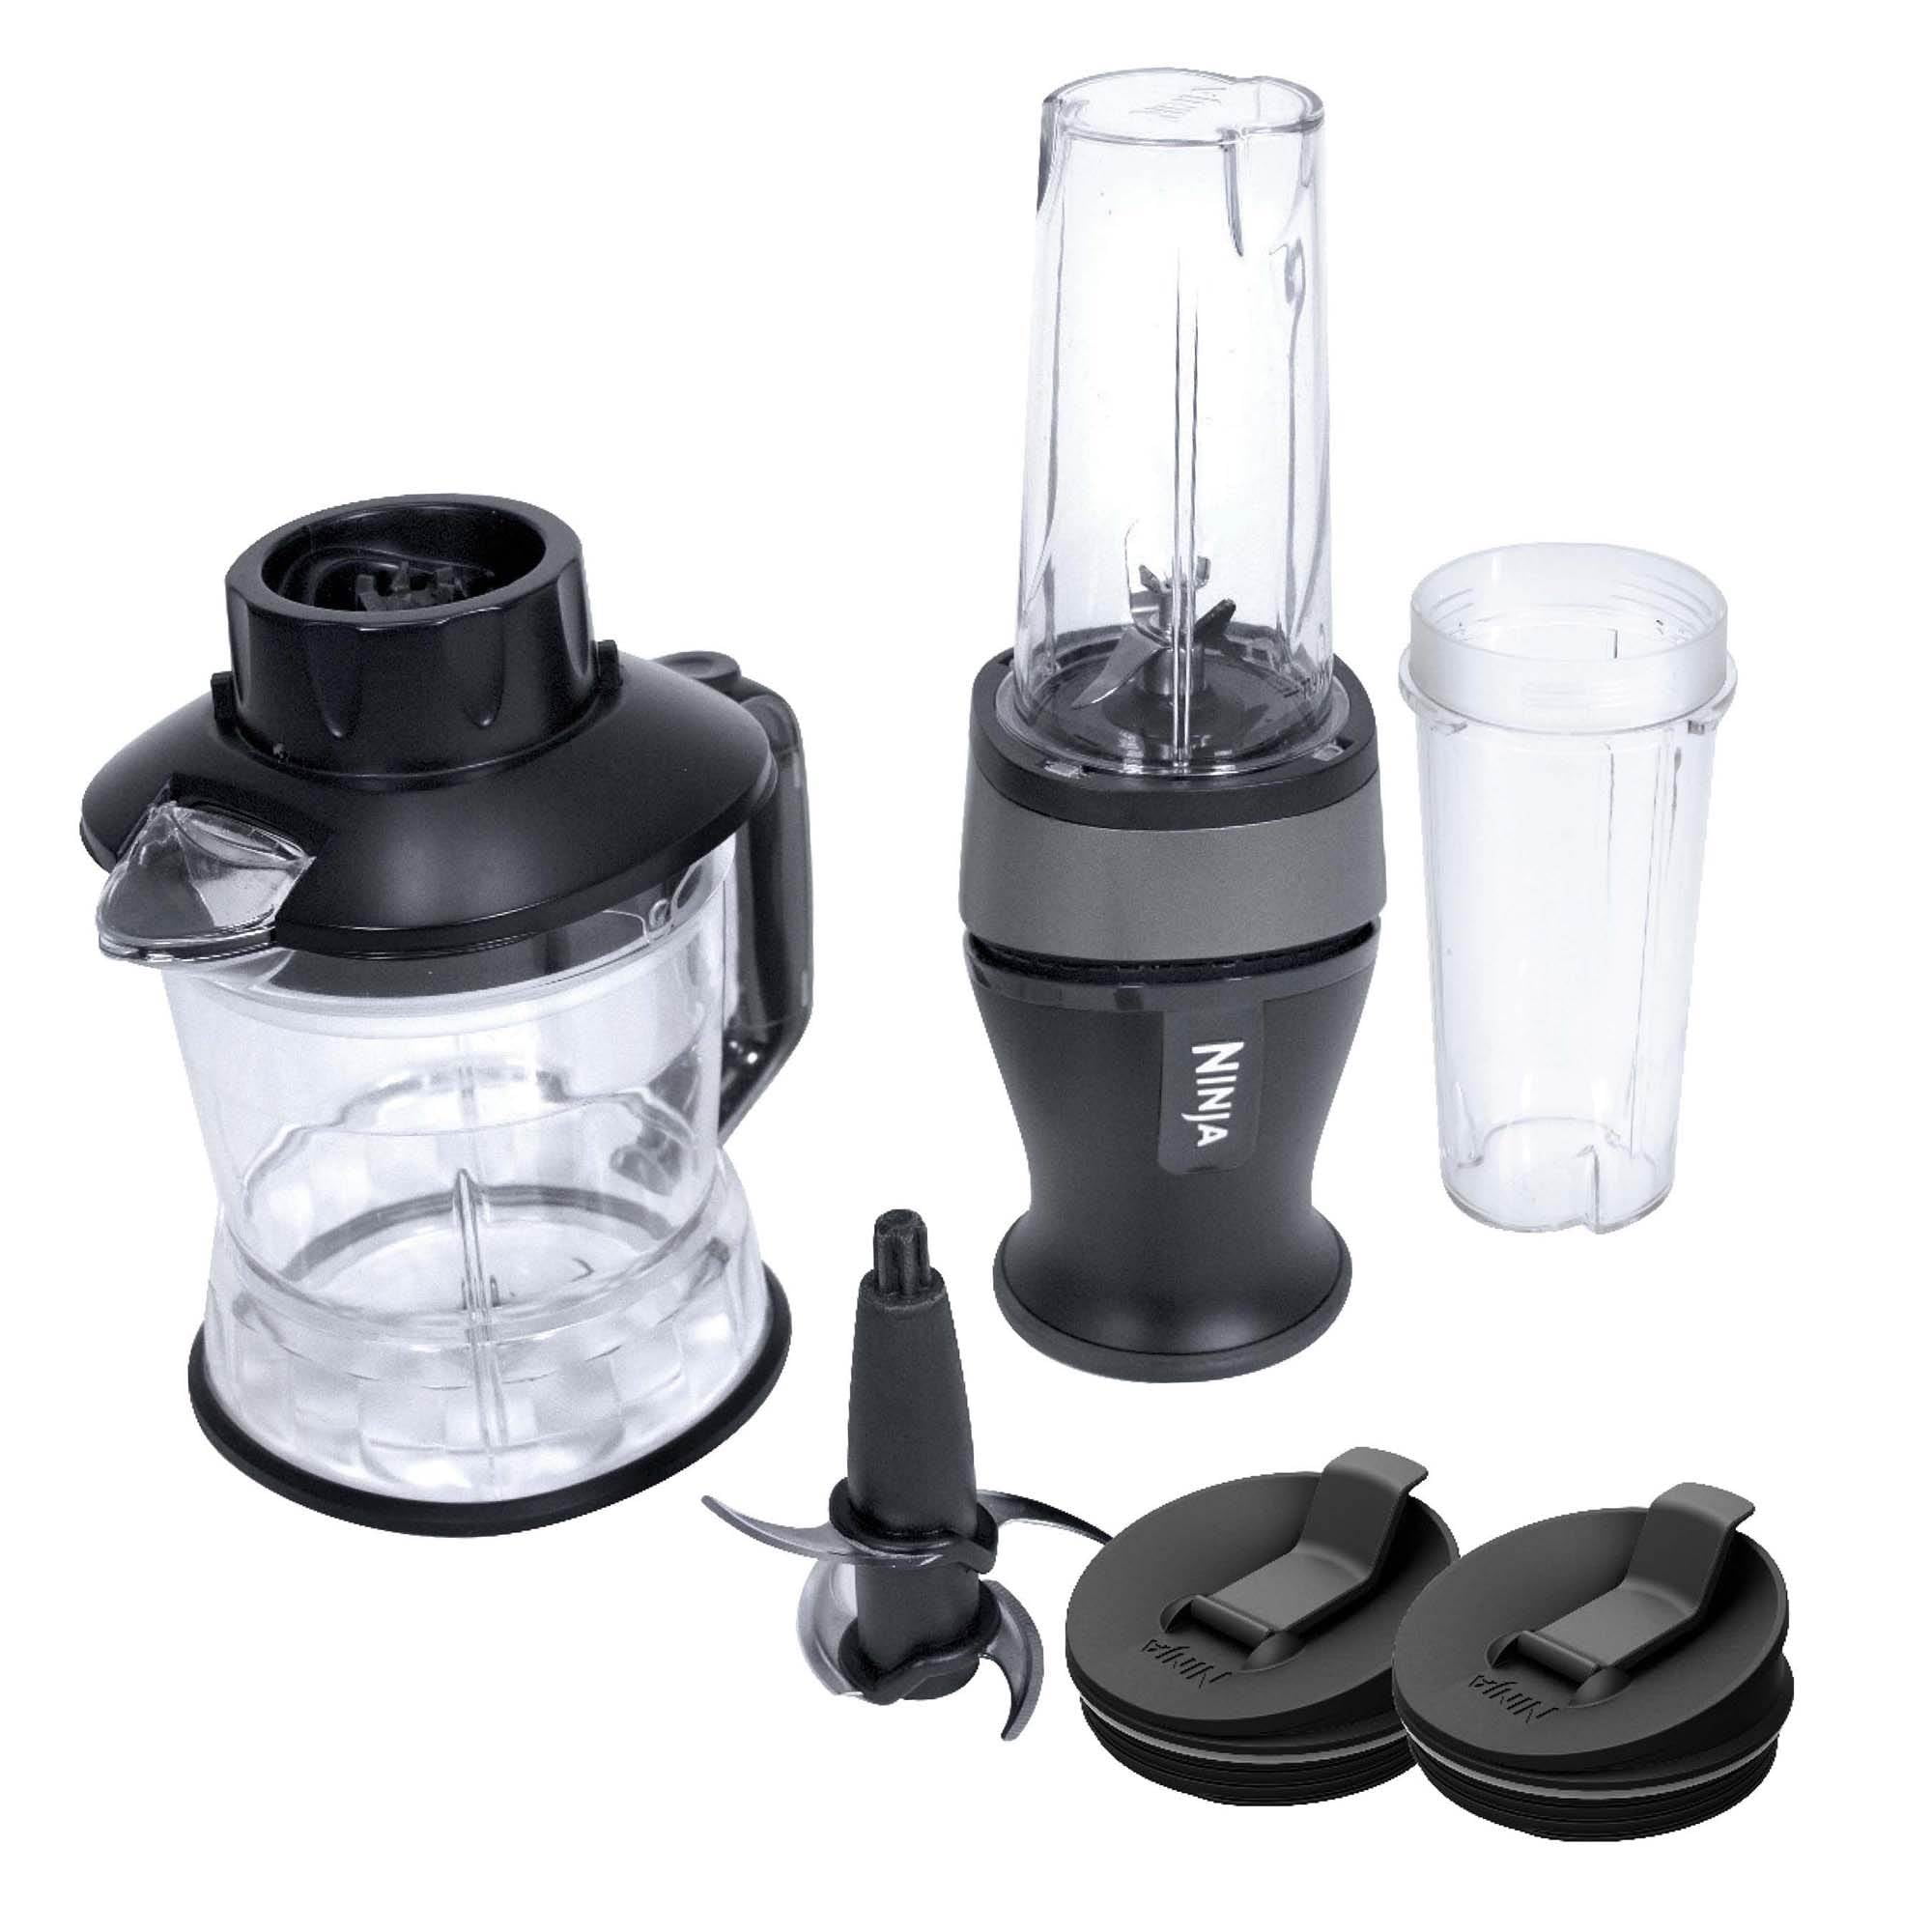 Product Review: The 2-in-1 Blender and Processor That Improved My